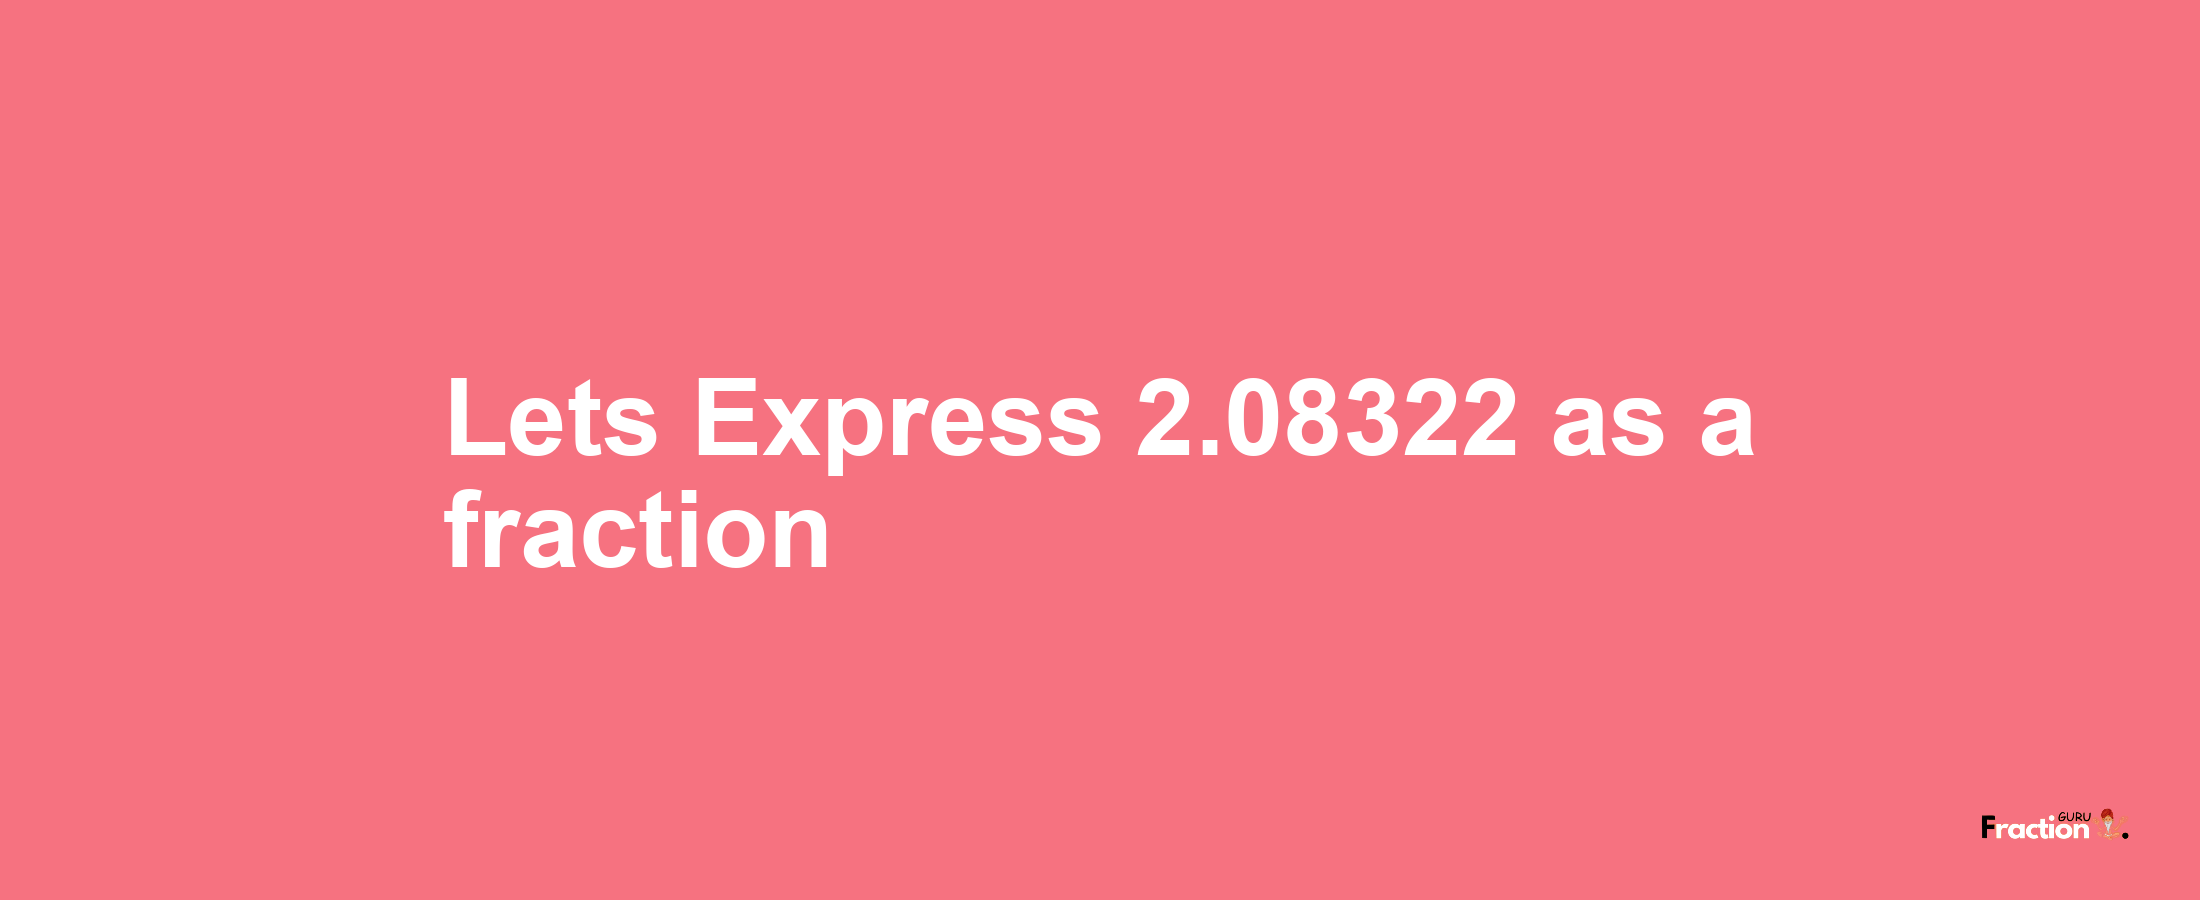 Lets Express 2.08322 as afraction